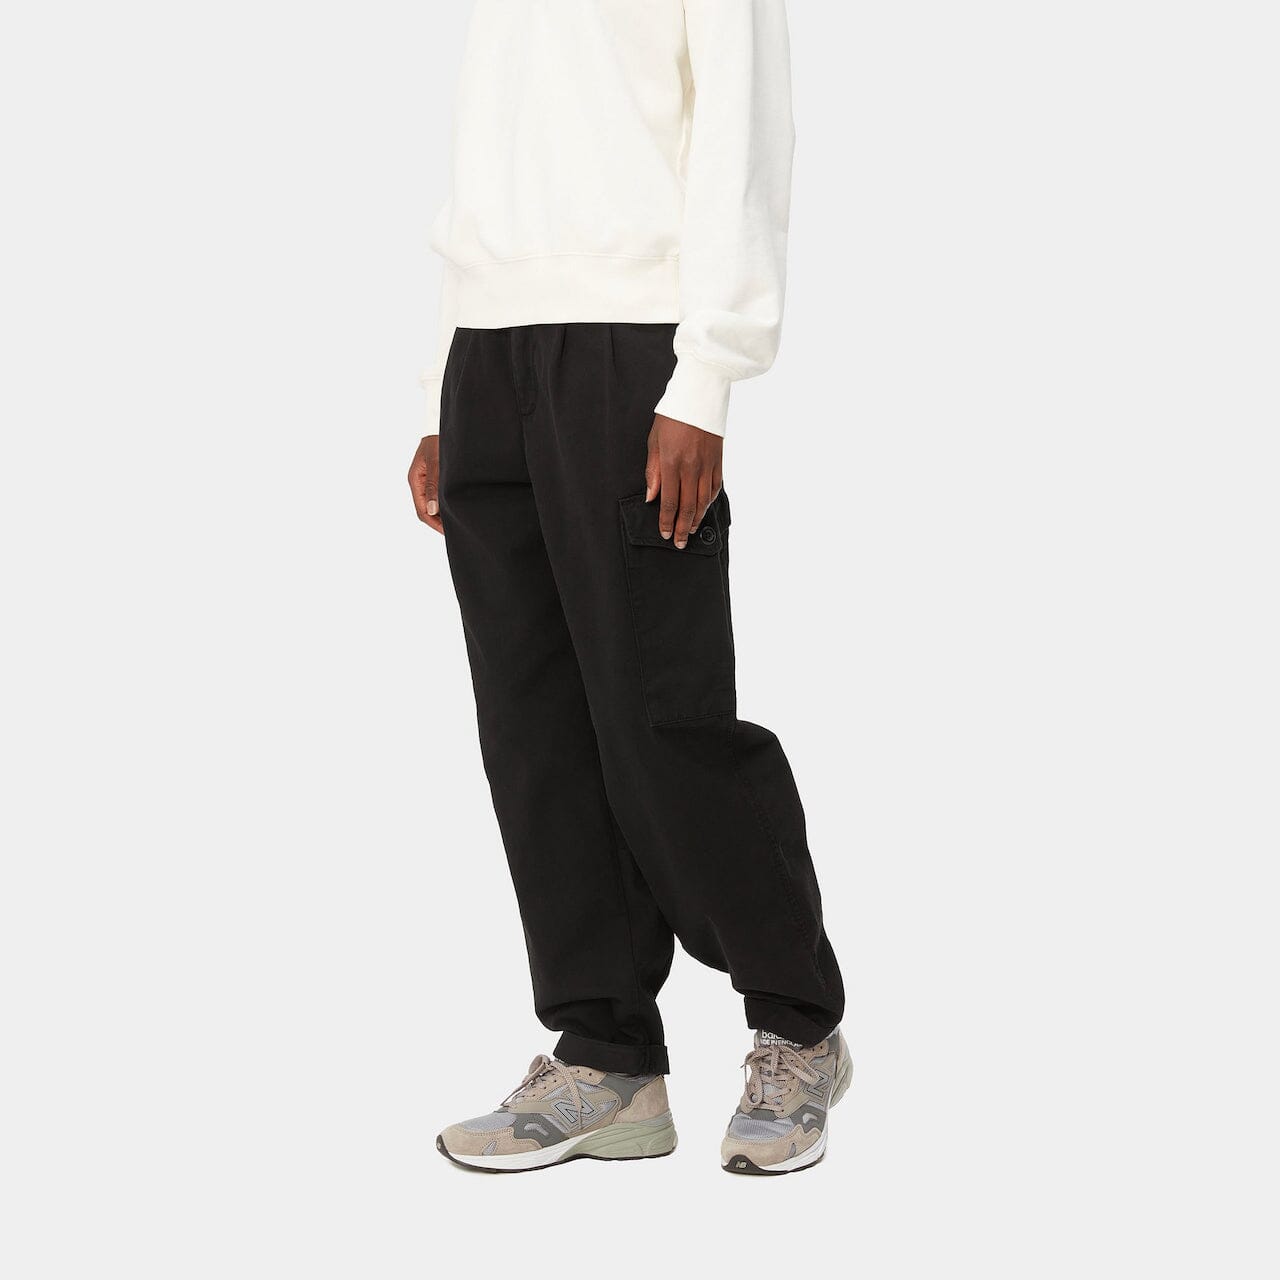 COLLINS TWILL RELAXED FIT PANTS PANT CARHARTT 